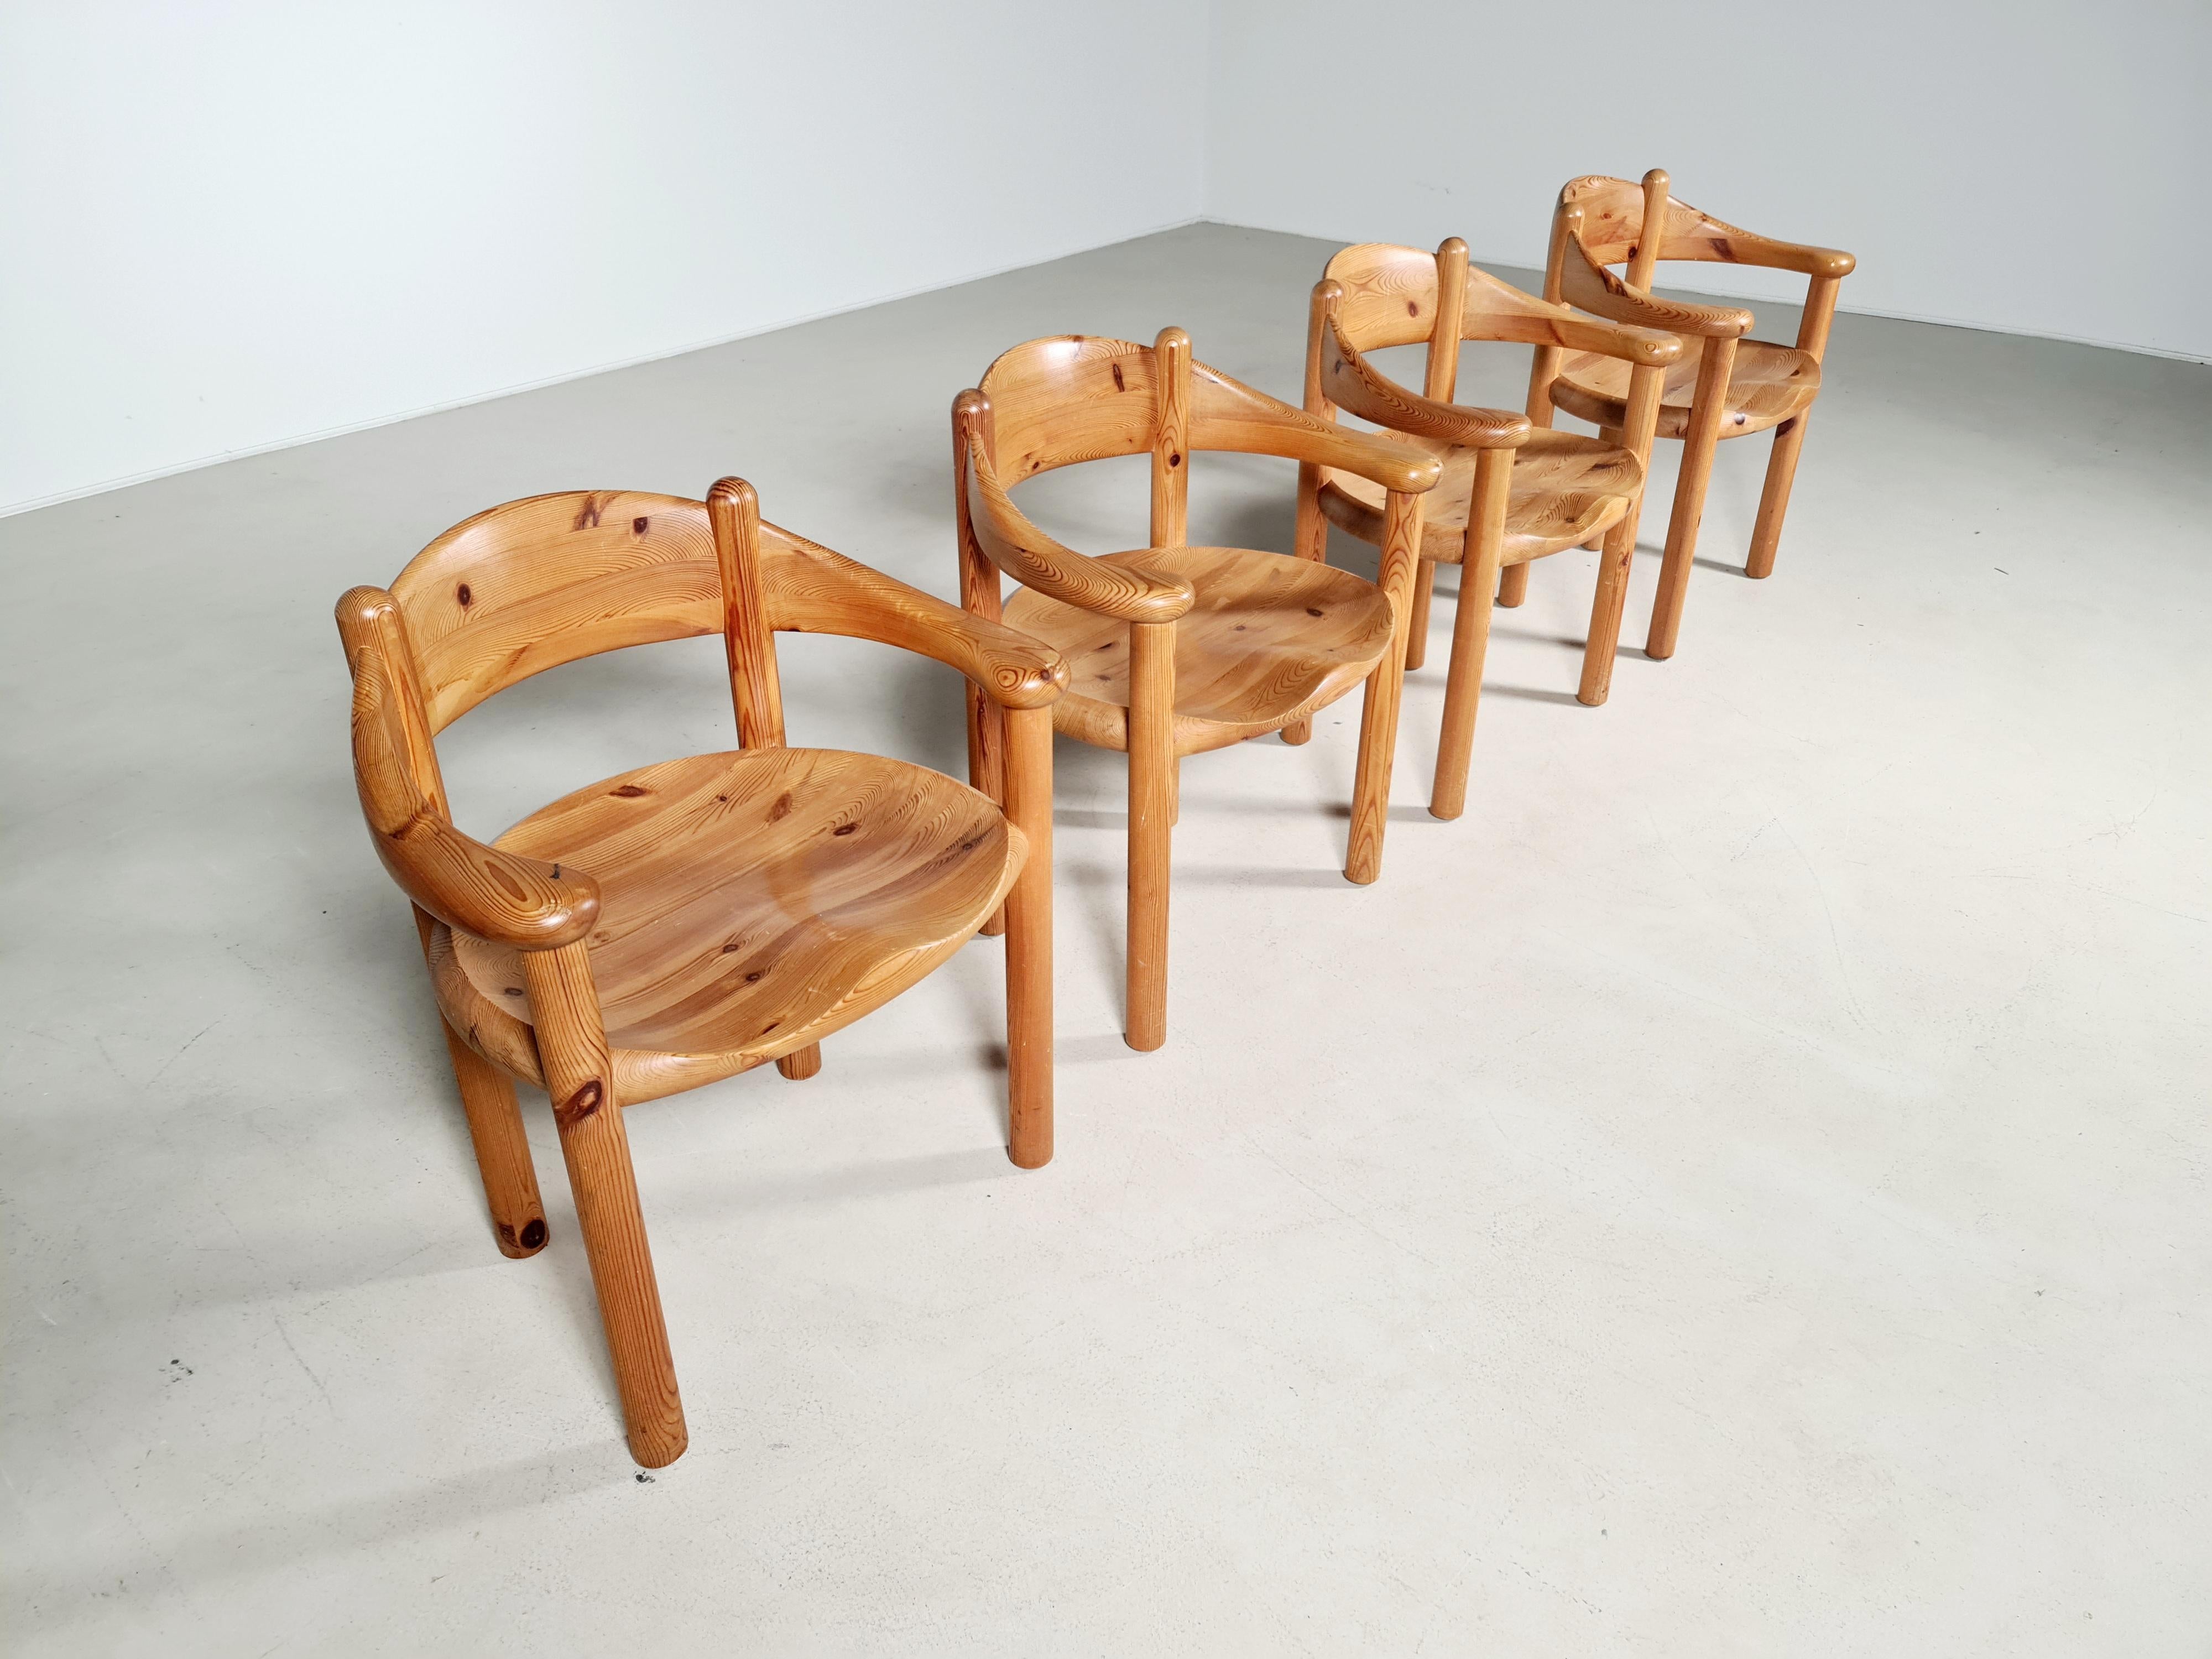 Fantastic set of 4 solid pine wood chairs, designed in the 60s by Rainer Daumiller for Hirtshals Savværk . The design is clearly inspired by Charlotte Perriand. Beautiful organic shaped and a very nice grain on the wood. Really comfortable as well.